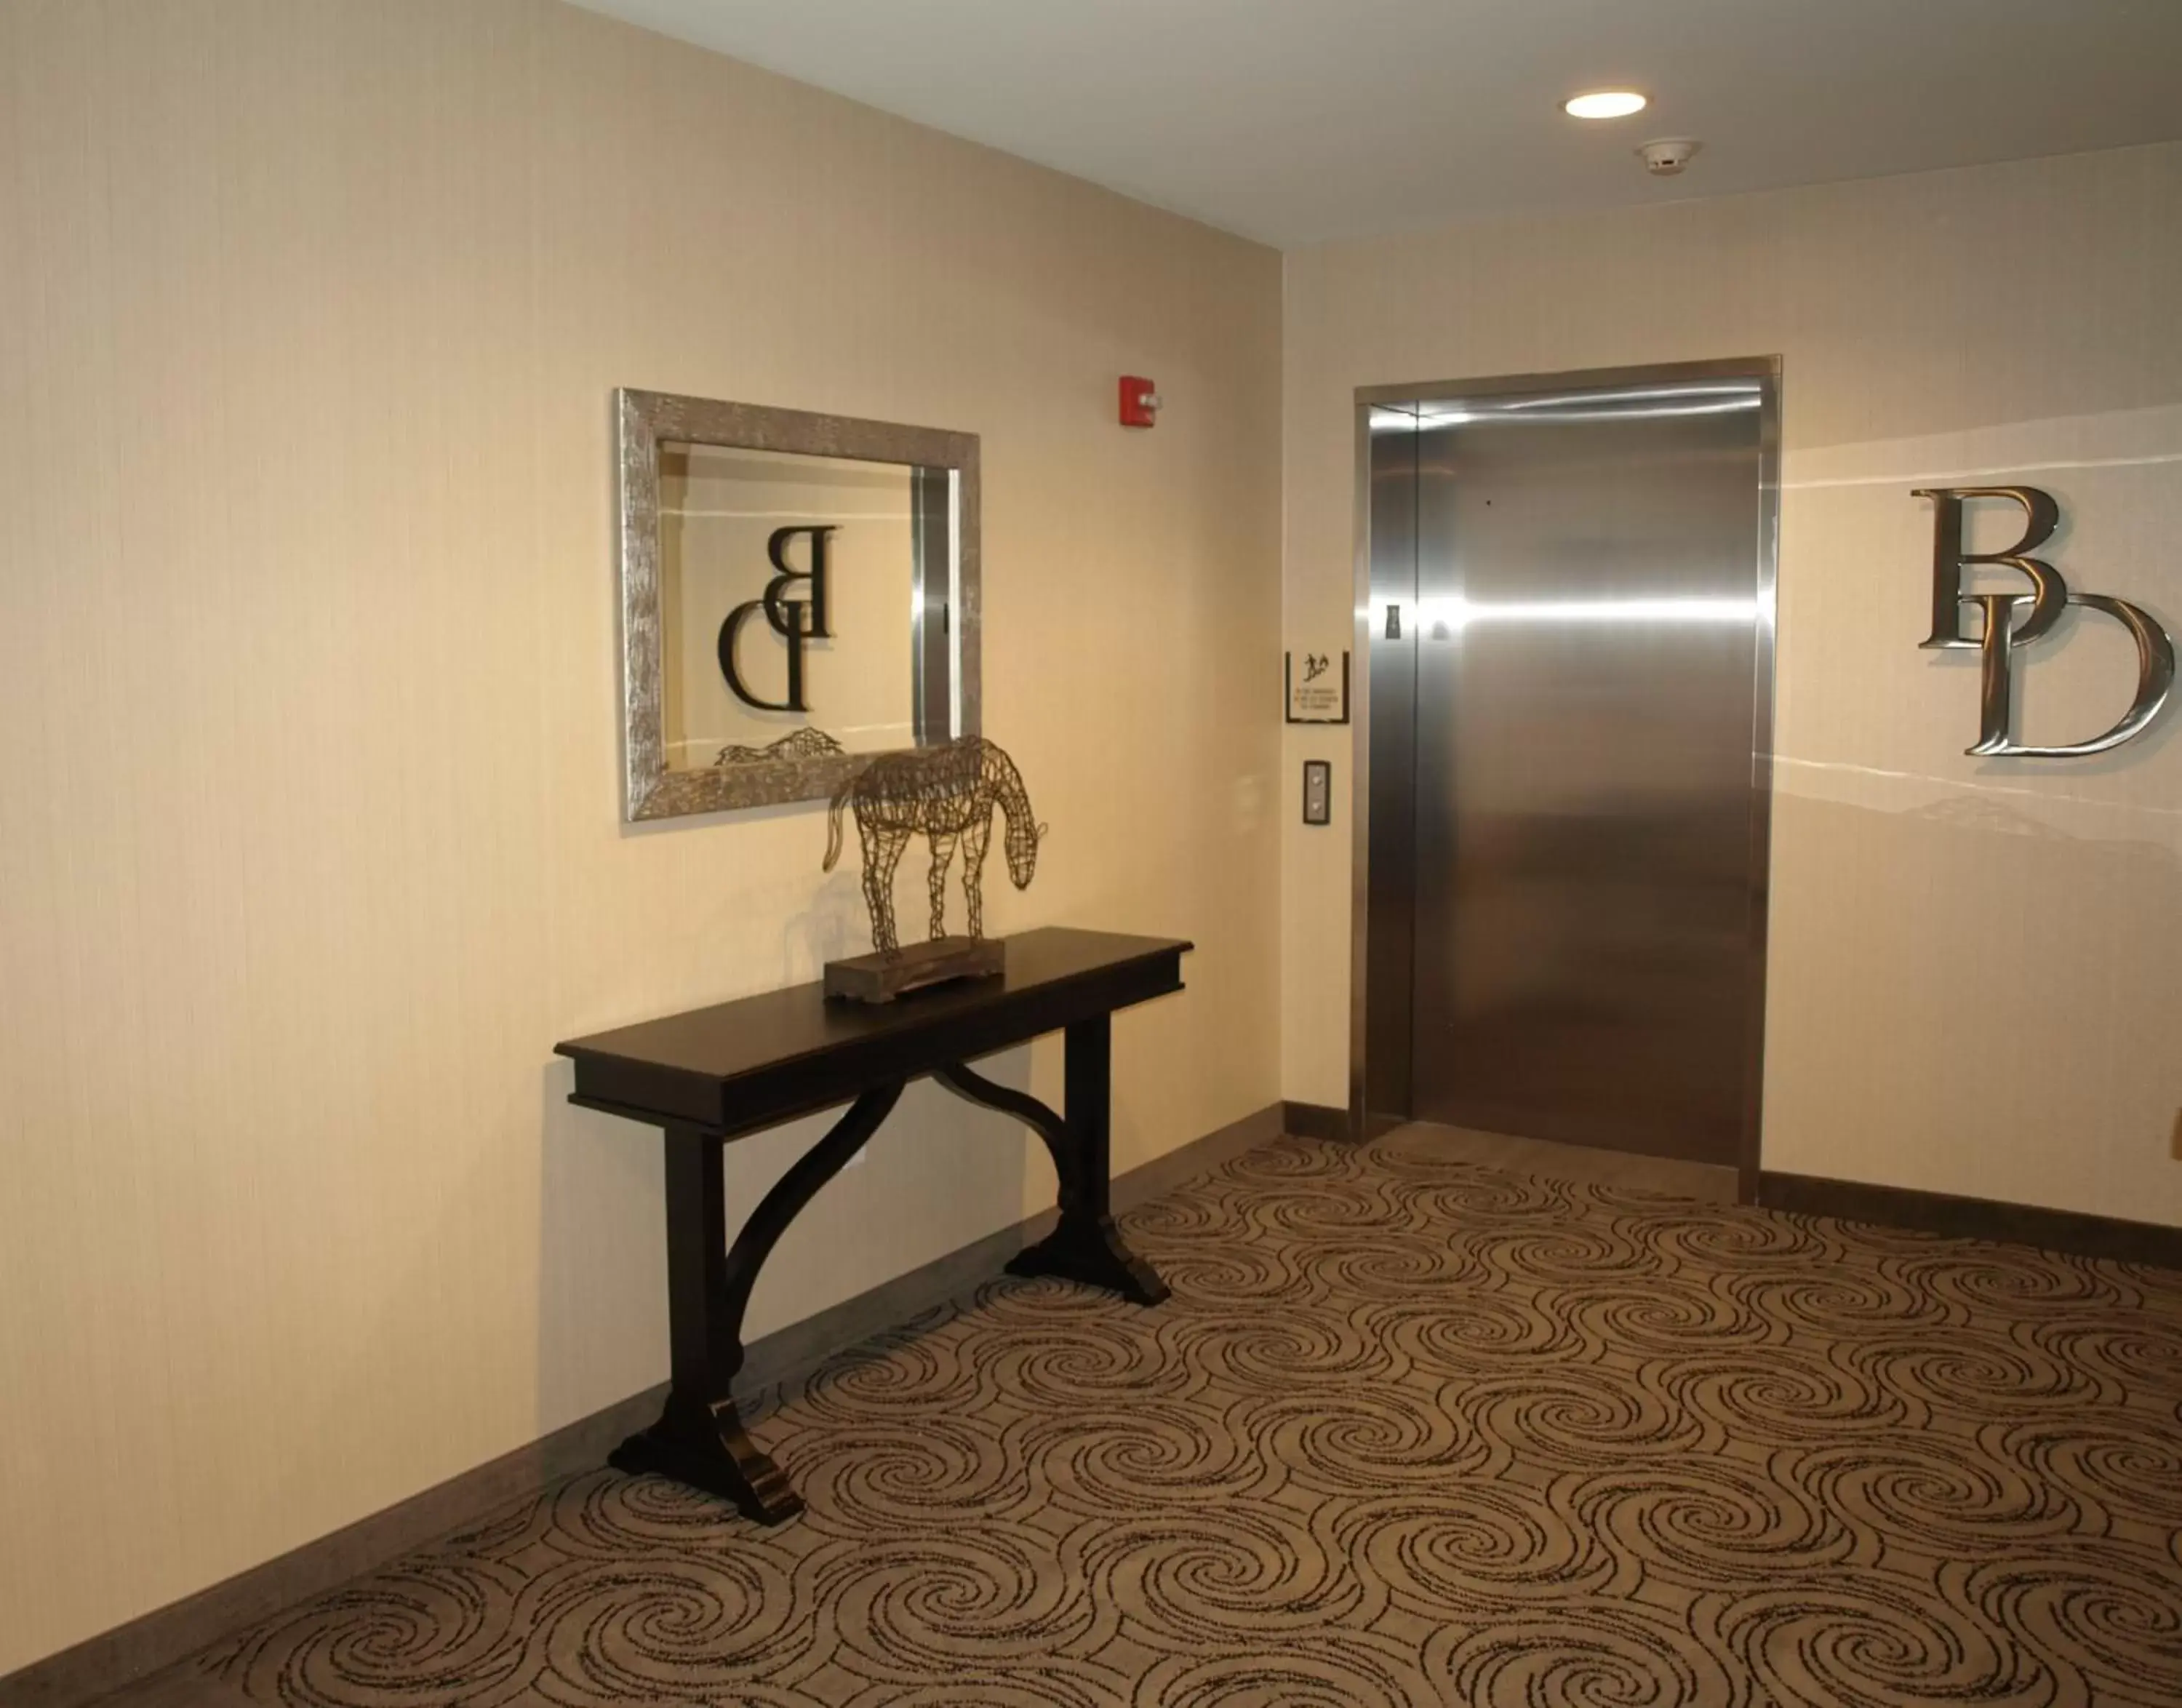 Area and facilities in Hotel at Batavia Downs